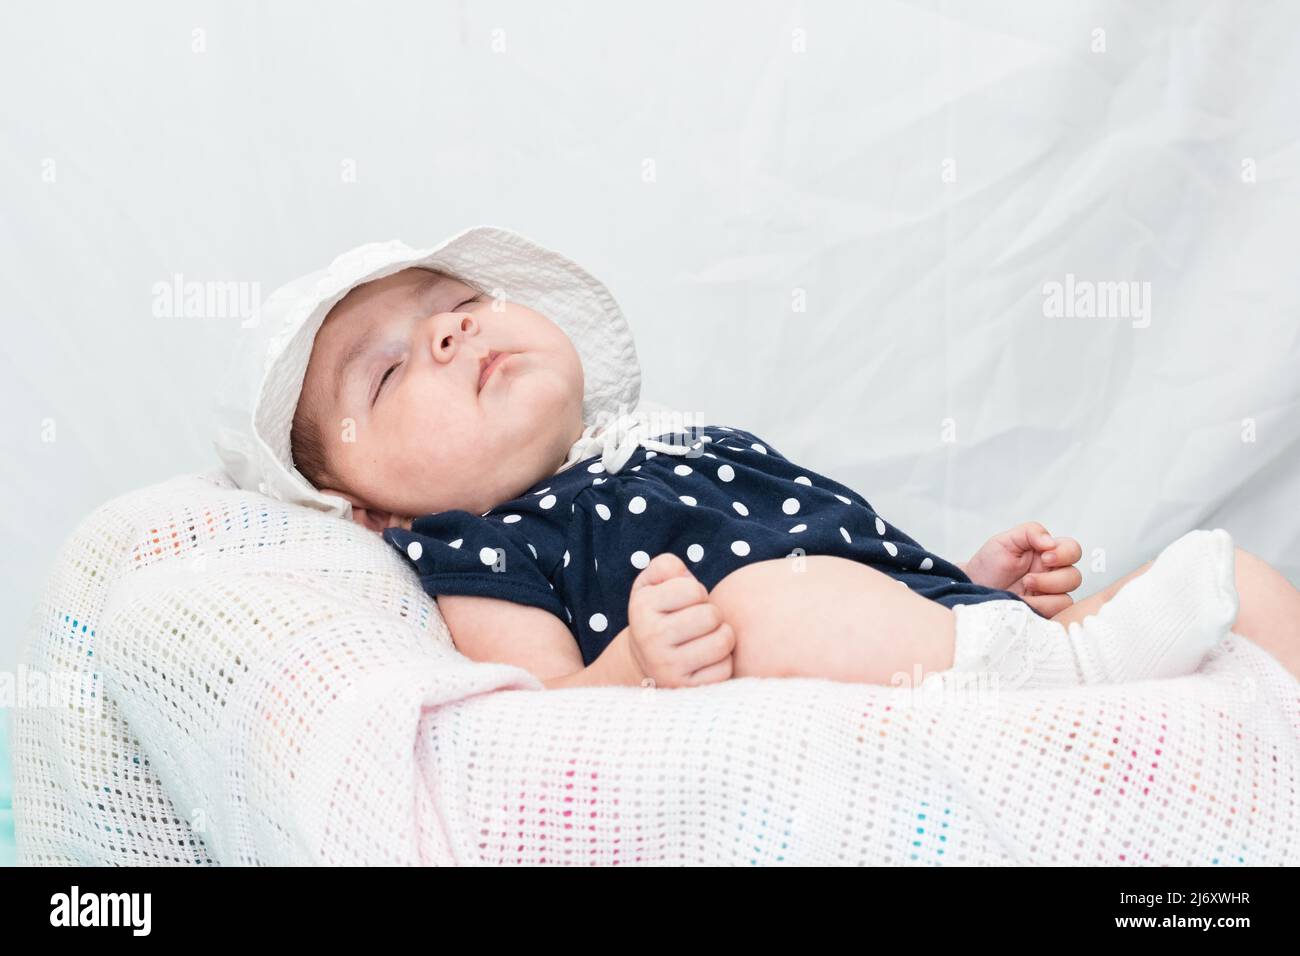 beautiful caucasian baby sleeping peacefully on a small cradle, dressed in a blue smock and a white hat. on a white background with space to copy text Stock Photo